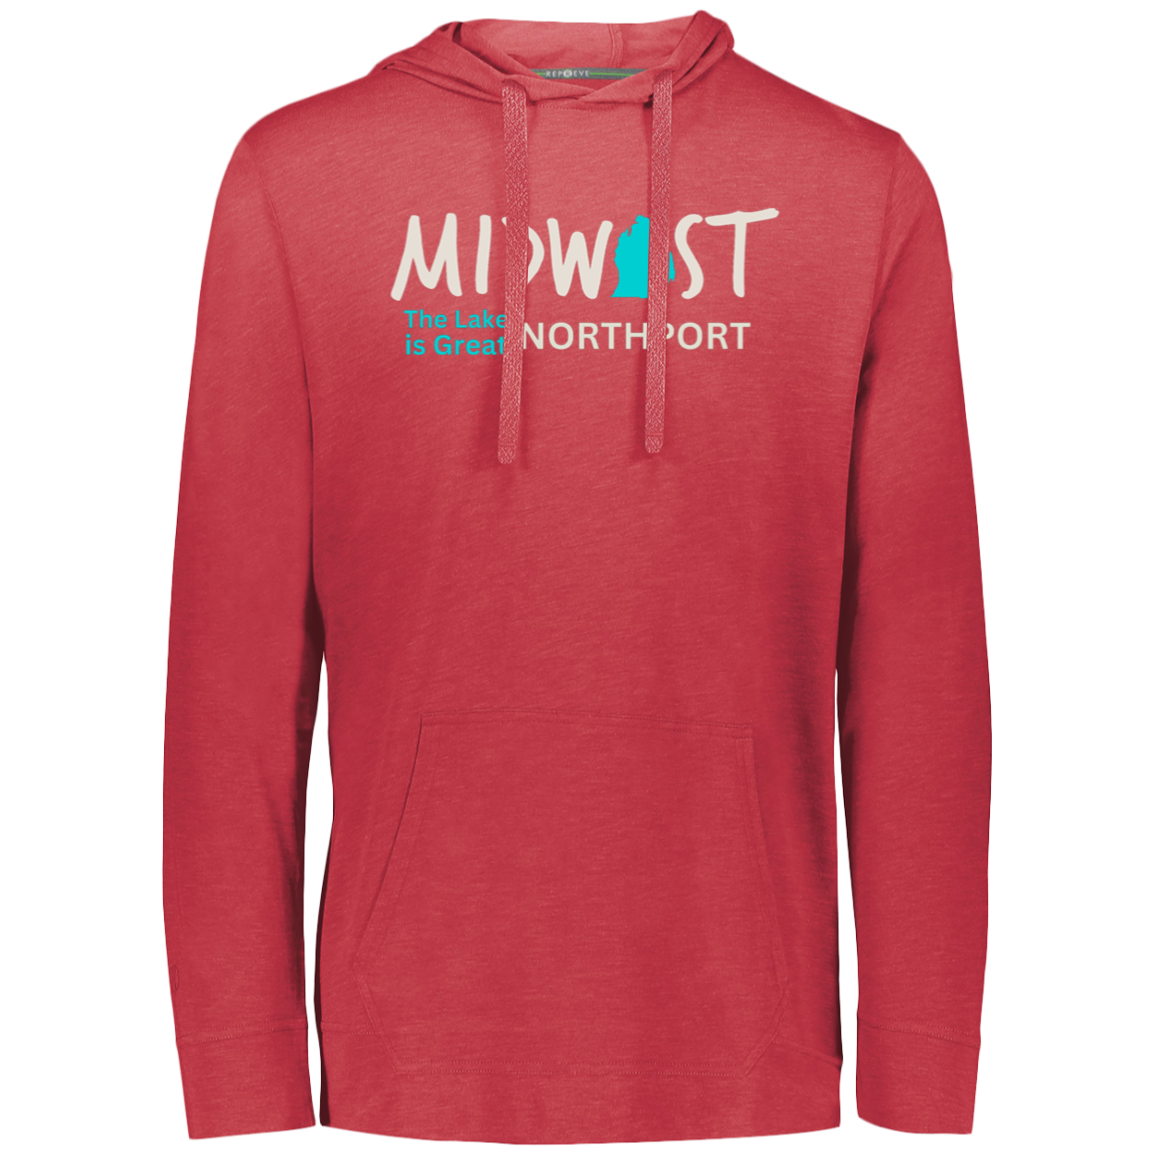 Midwest The Lake is Great Northport Eco Lightweight Hoodie